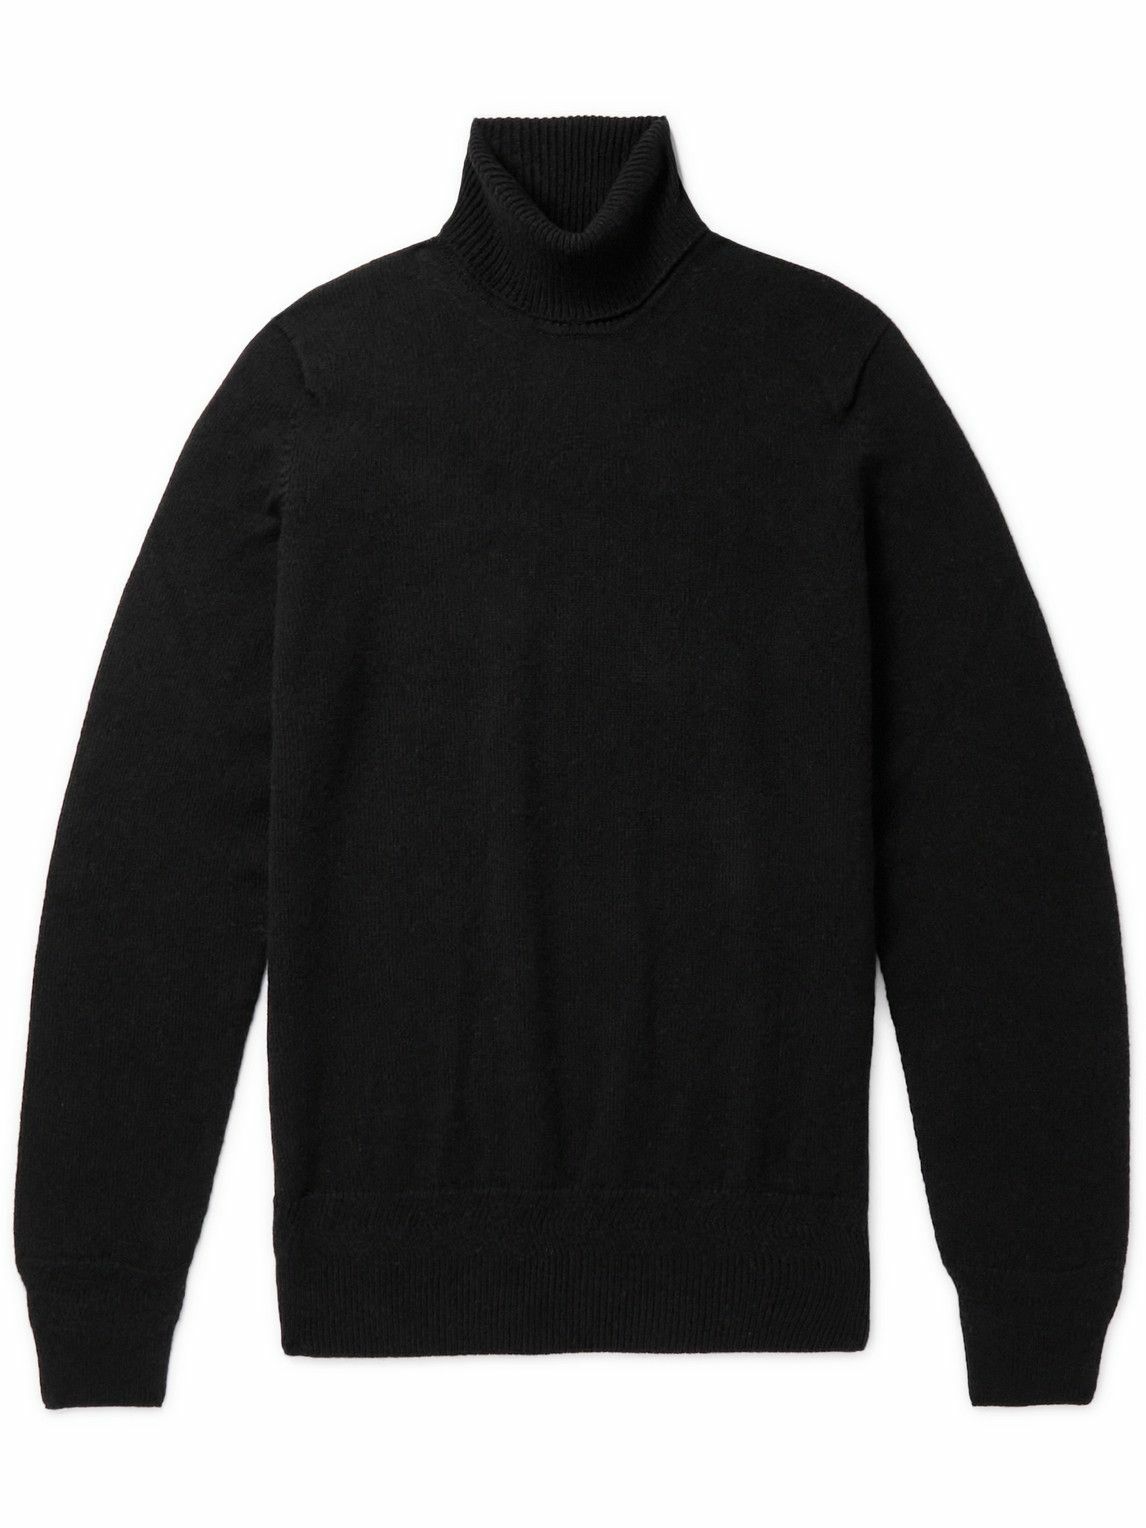 John Smedley - Kolton Recycled Cashmere and Merino Wool-Blend Rollneck ...